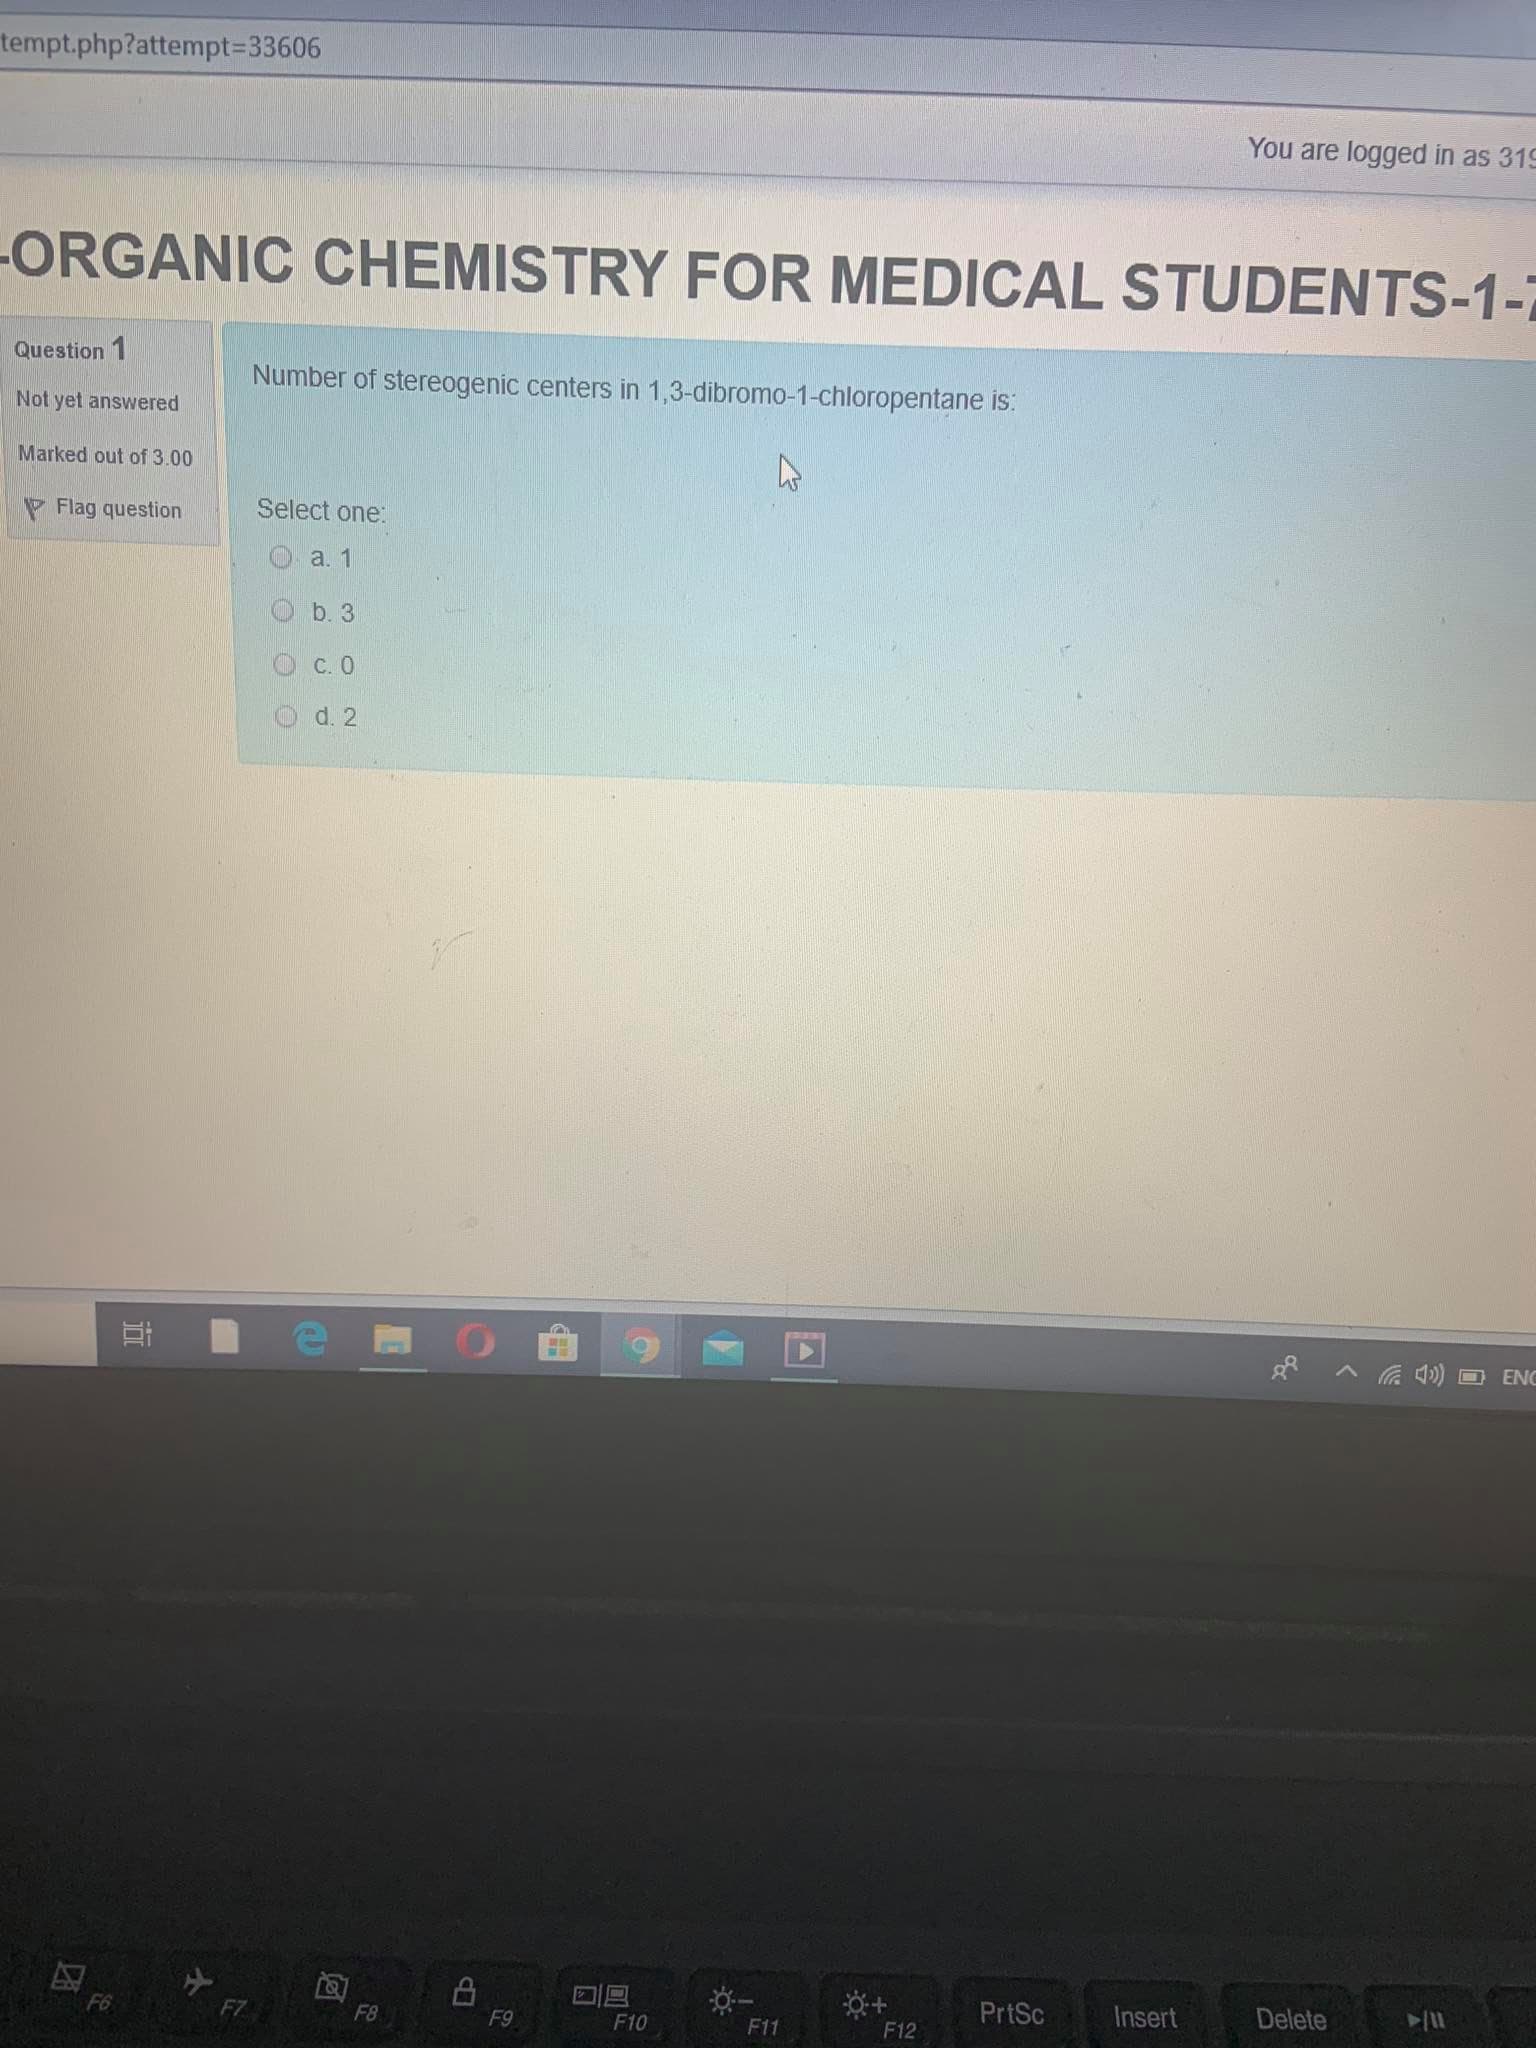 tempt.php?attempt%3D33606
You are logged in as 319
-ORGANIC CHEMISTRY FOR MEDICAL STUDENTS-1-7
Question 1
Number of stereogenic centers in 1,3-dibromo-1-chloropentane is:
Not yet answered
Marked out of 3.00
V Flag question
Select one:
a. 1
b. 3
O c. 0
d. 2
G 4) O ENC
F6
F7
F8
PrtSc
Insert
Delete
F9
F10
F11
F12
